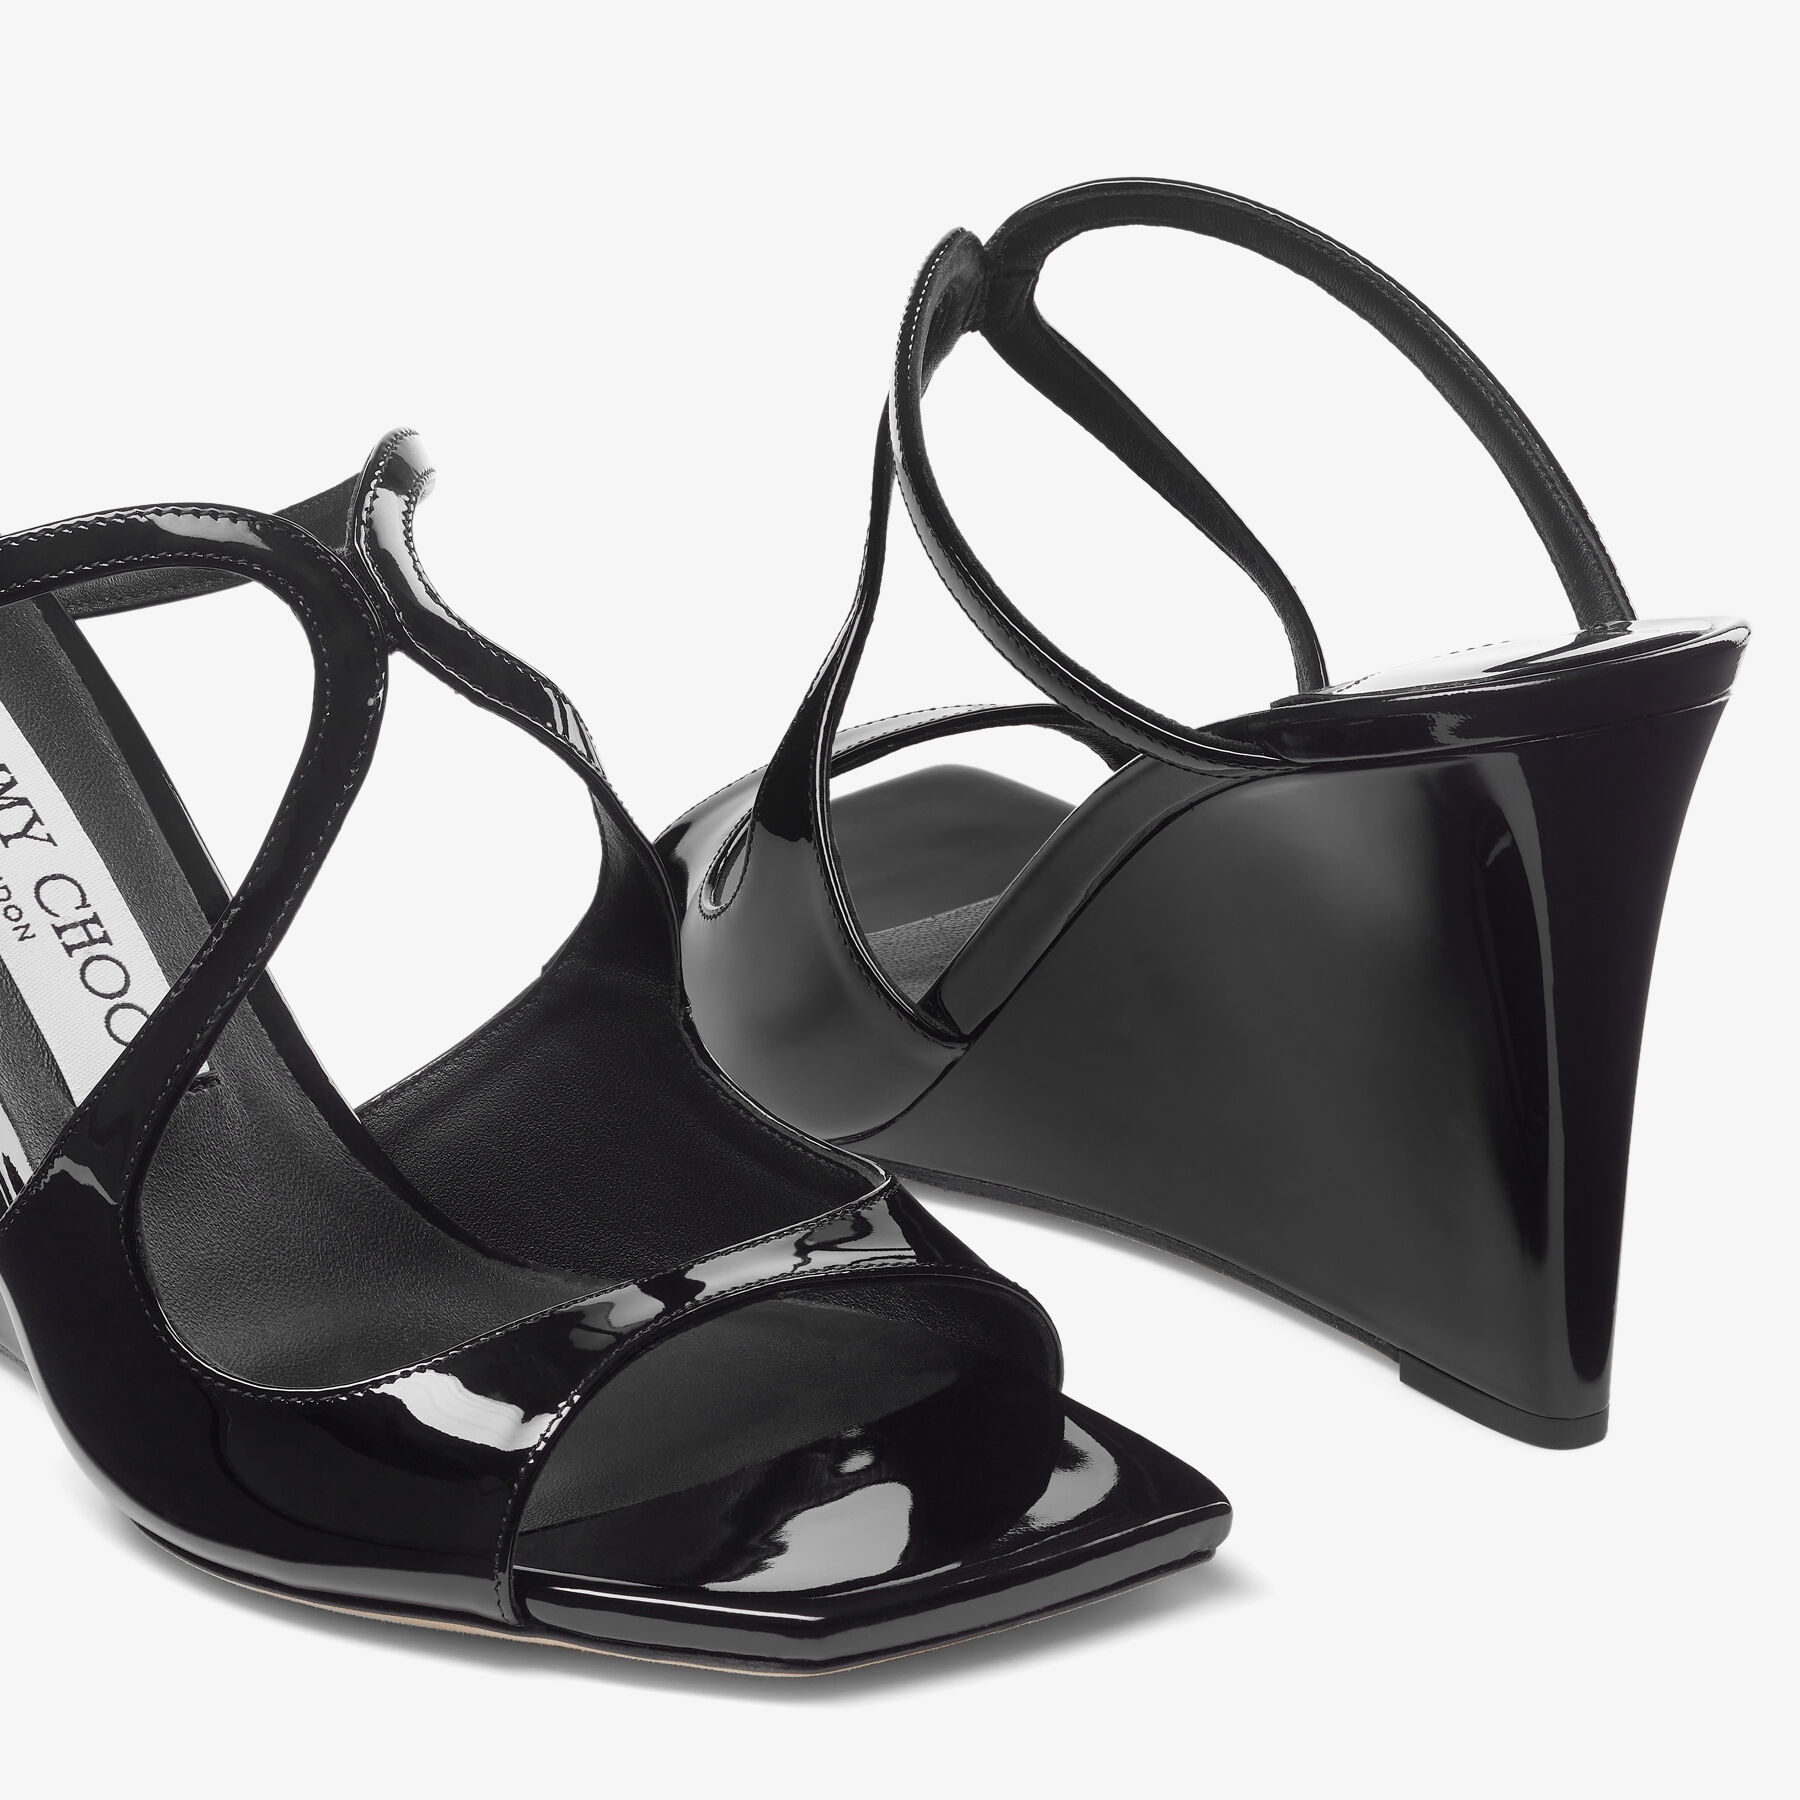 Anise Wedge 85
Black Patent Leather Wedge Mules - 3